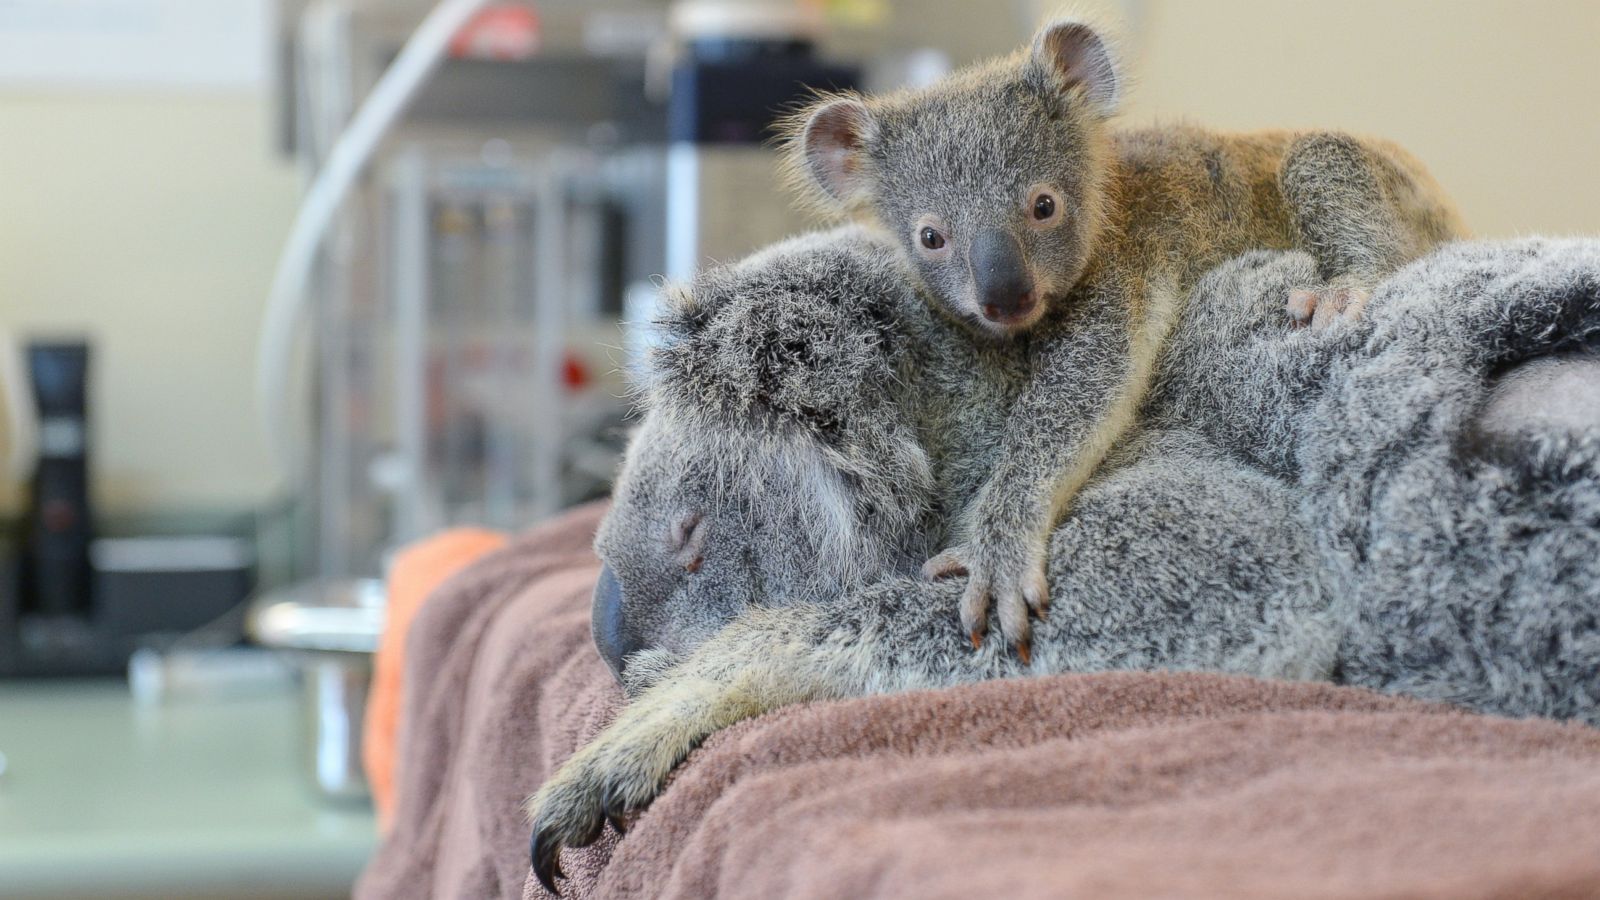 Baby Koala Hugs Mom During Surgery After They Were Hit by Car In Australia.